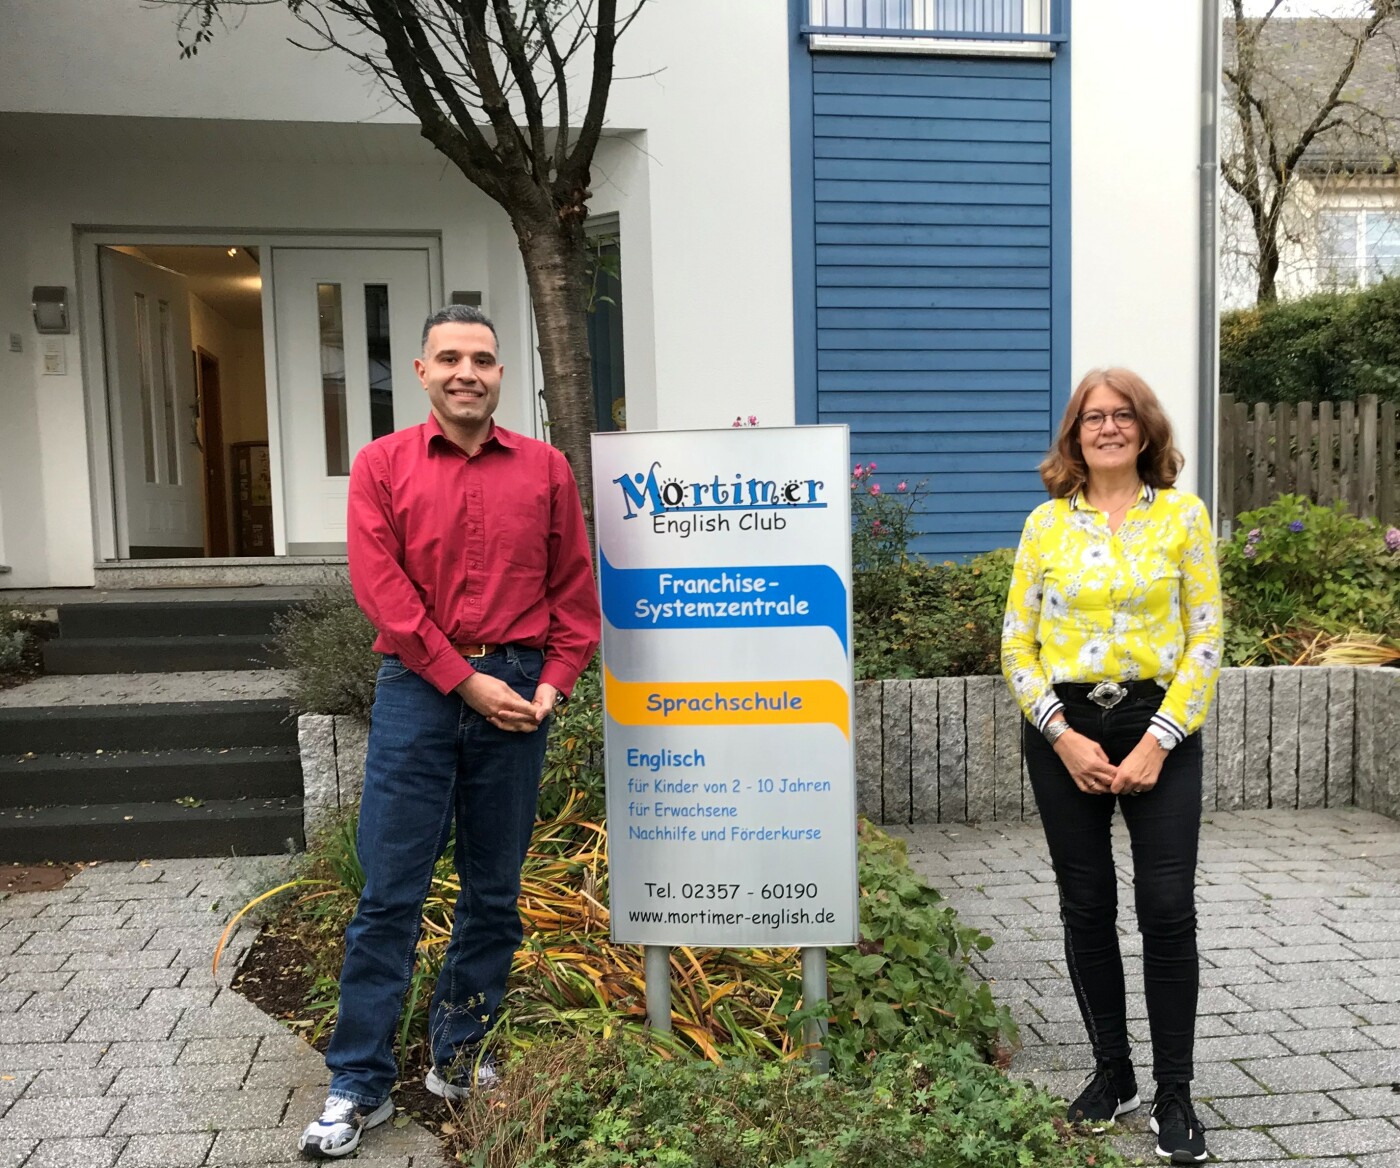 David Lashgari with our Managing Director Karola Scheer in front of our Headquarters